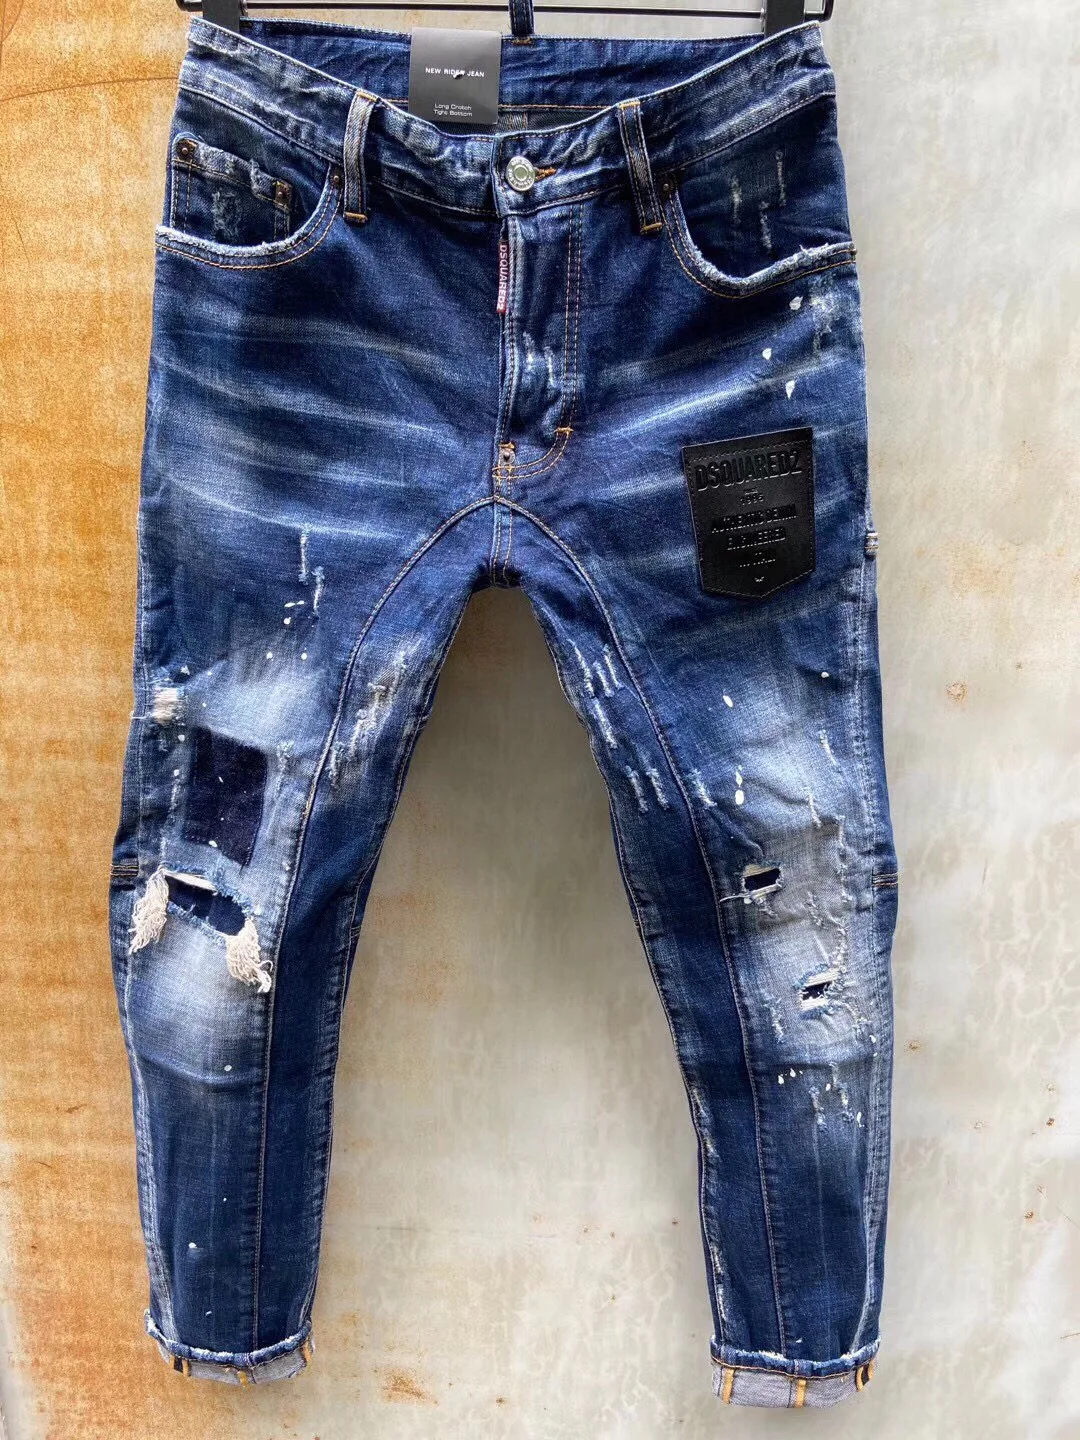 

Italian New Men's/Women's Wash Water Hole Patch Paint Make Old Stretch Slim Fashion DSQUARED2 Small Feet Jeans T121